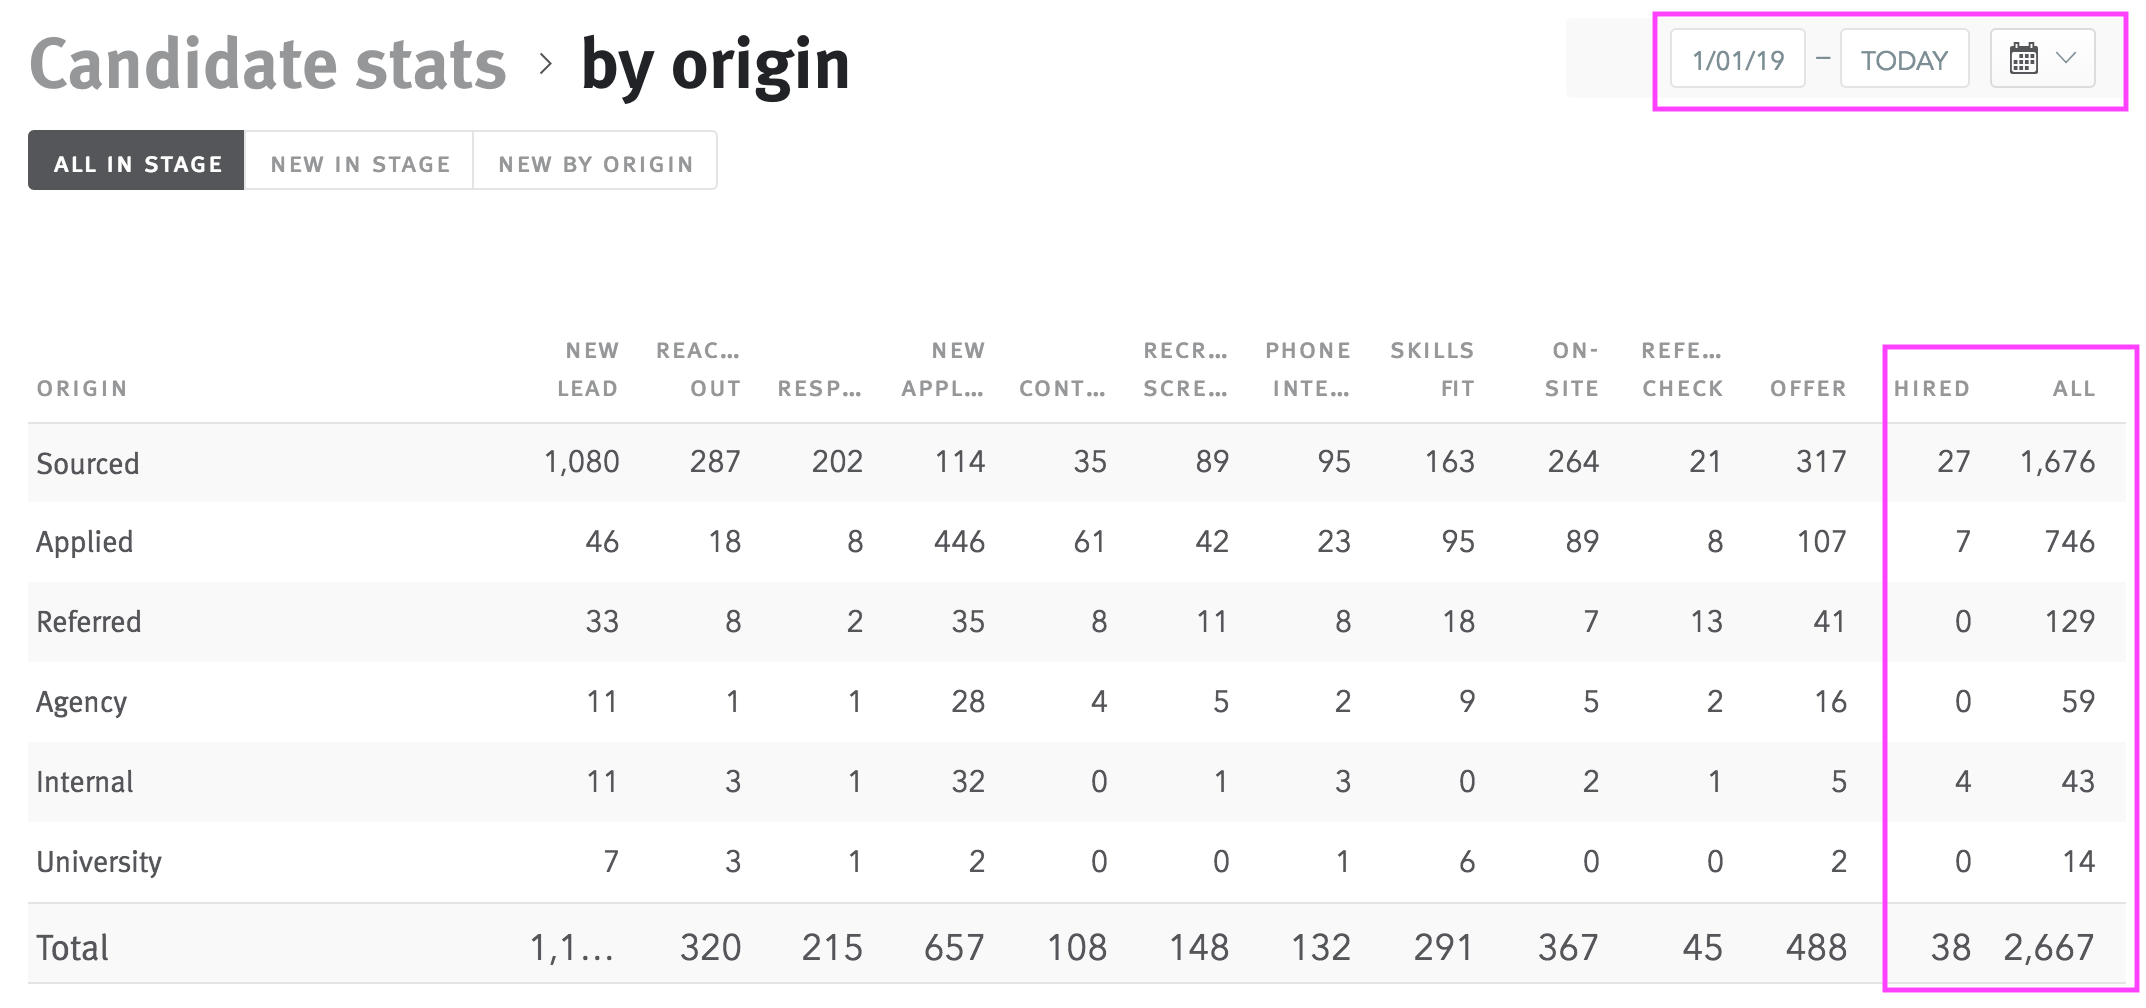 Candidate stats by origin report with hired tallies and date range filter outlined